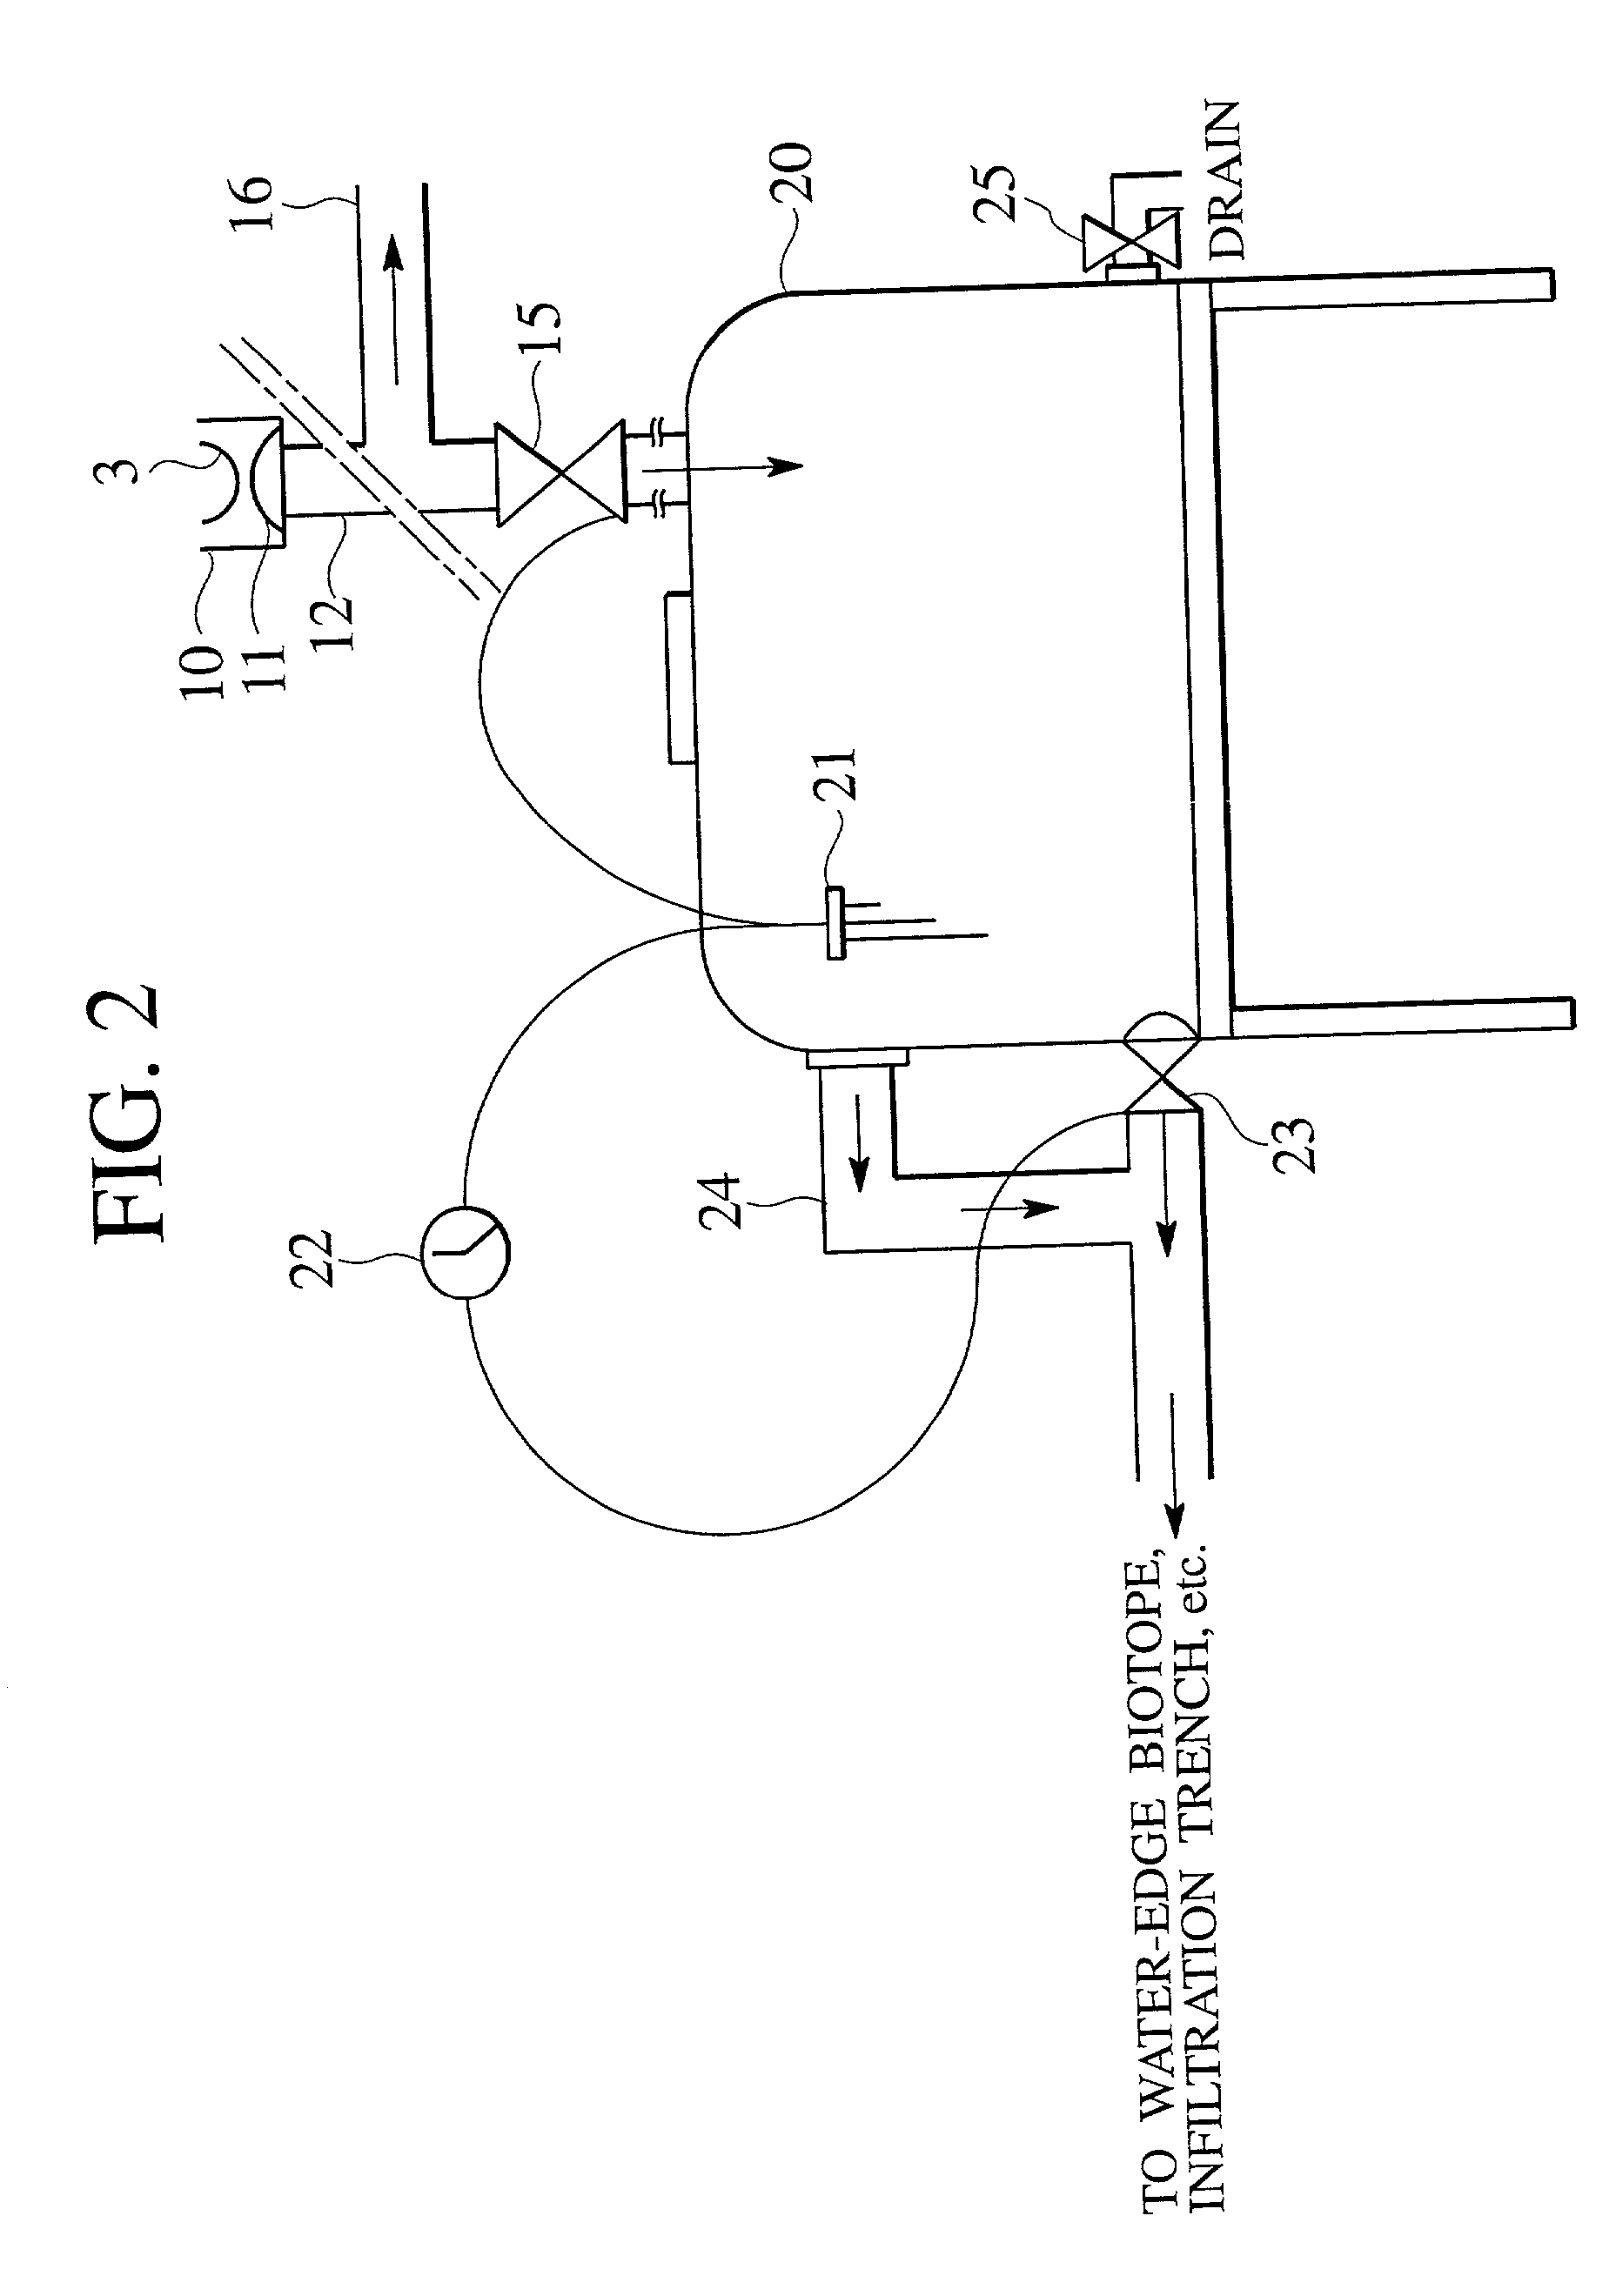 System and method for utilizing rainwater collected at buildings